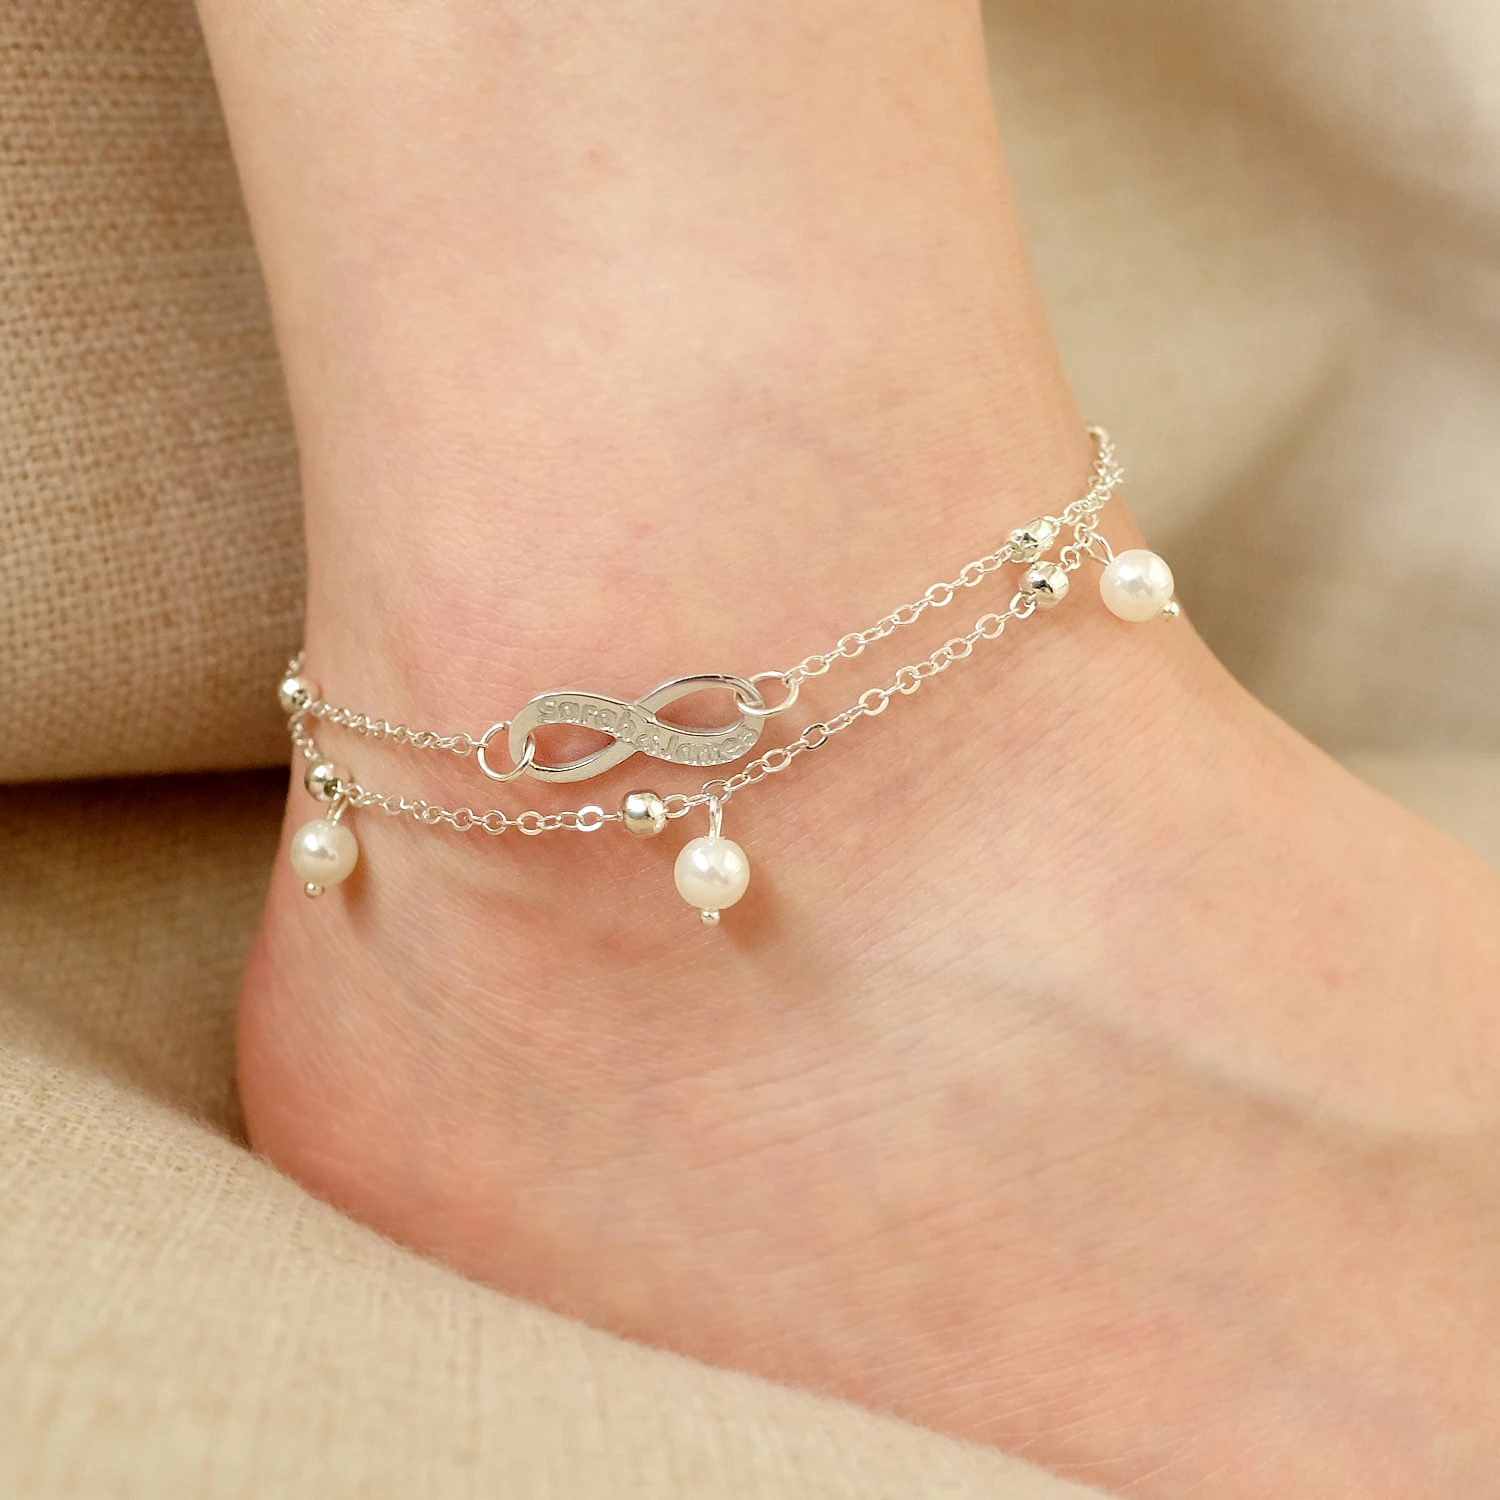 Custom Name Anklet Foot Chain Personalize Anklets for Women Bohemian Beach Jewelry Infinity Anklet Bridesmaid Gift for Her